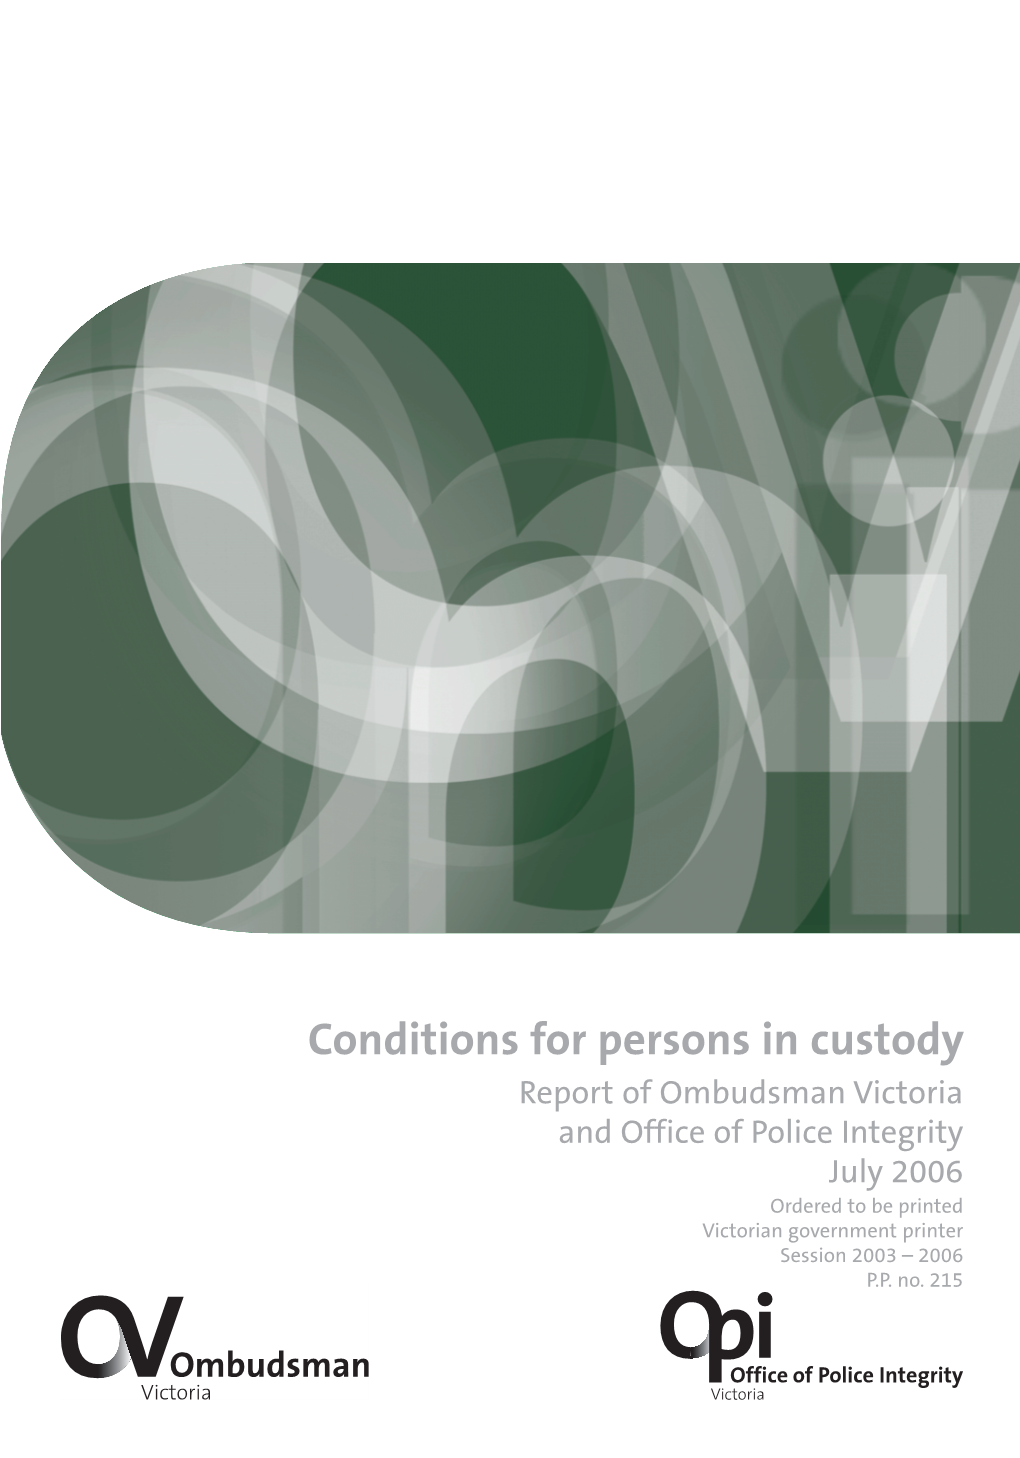 OPI Report: Conditions for Persons in Custody